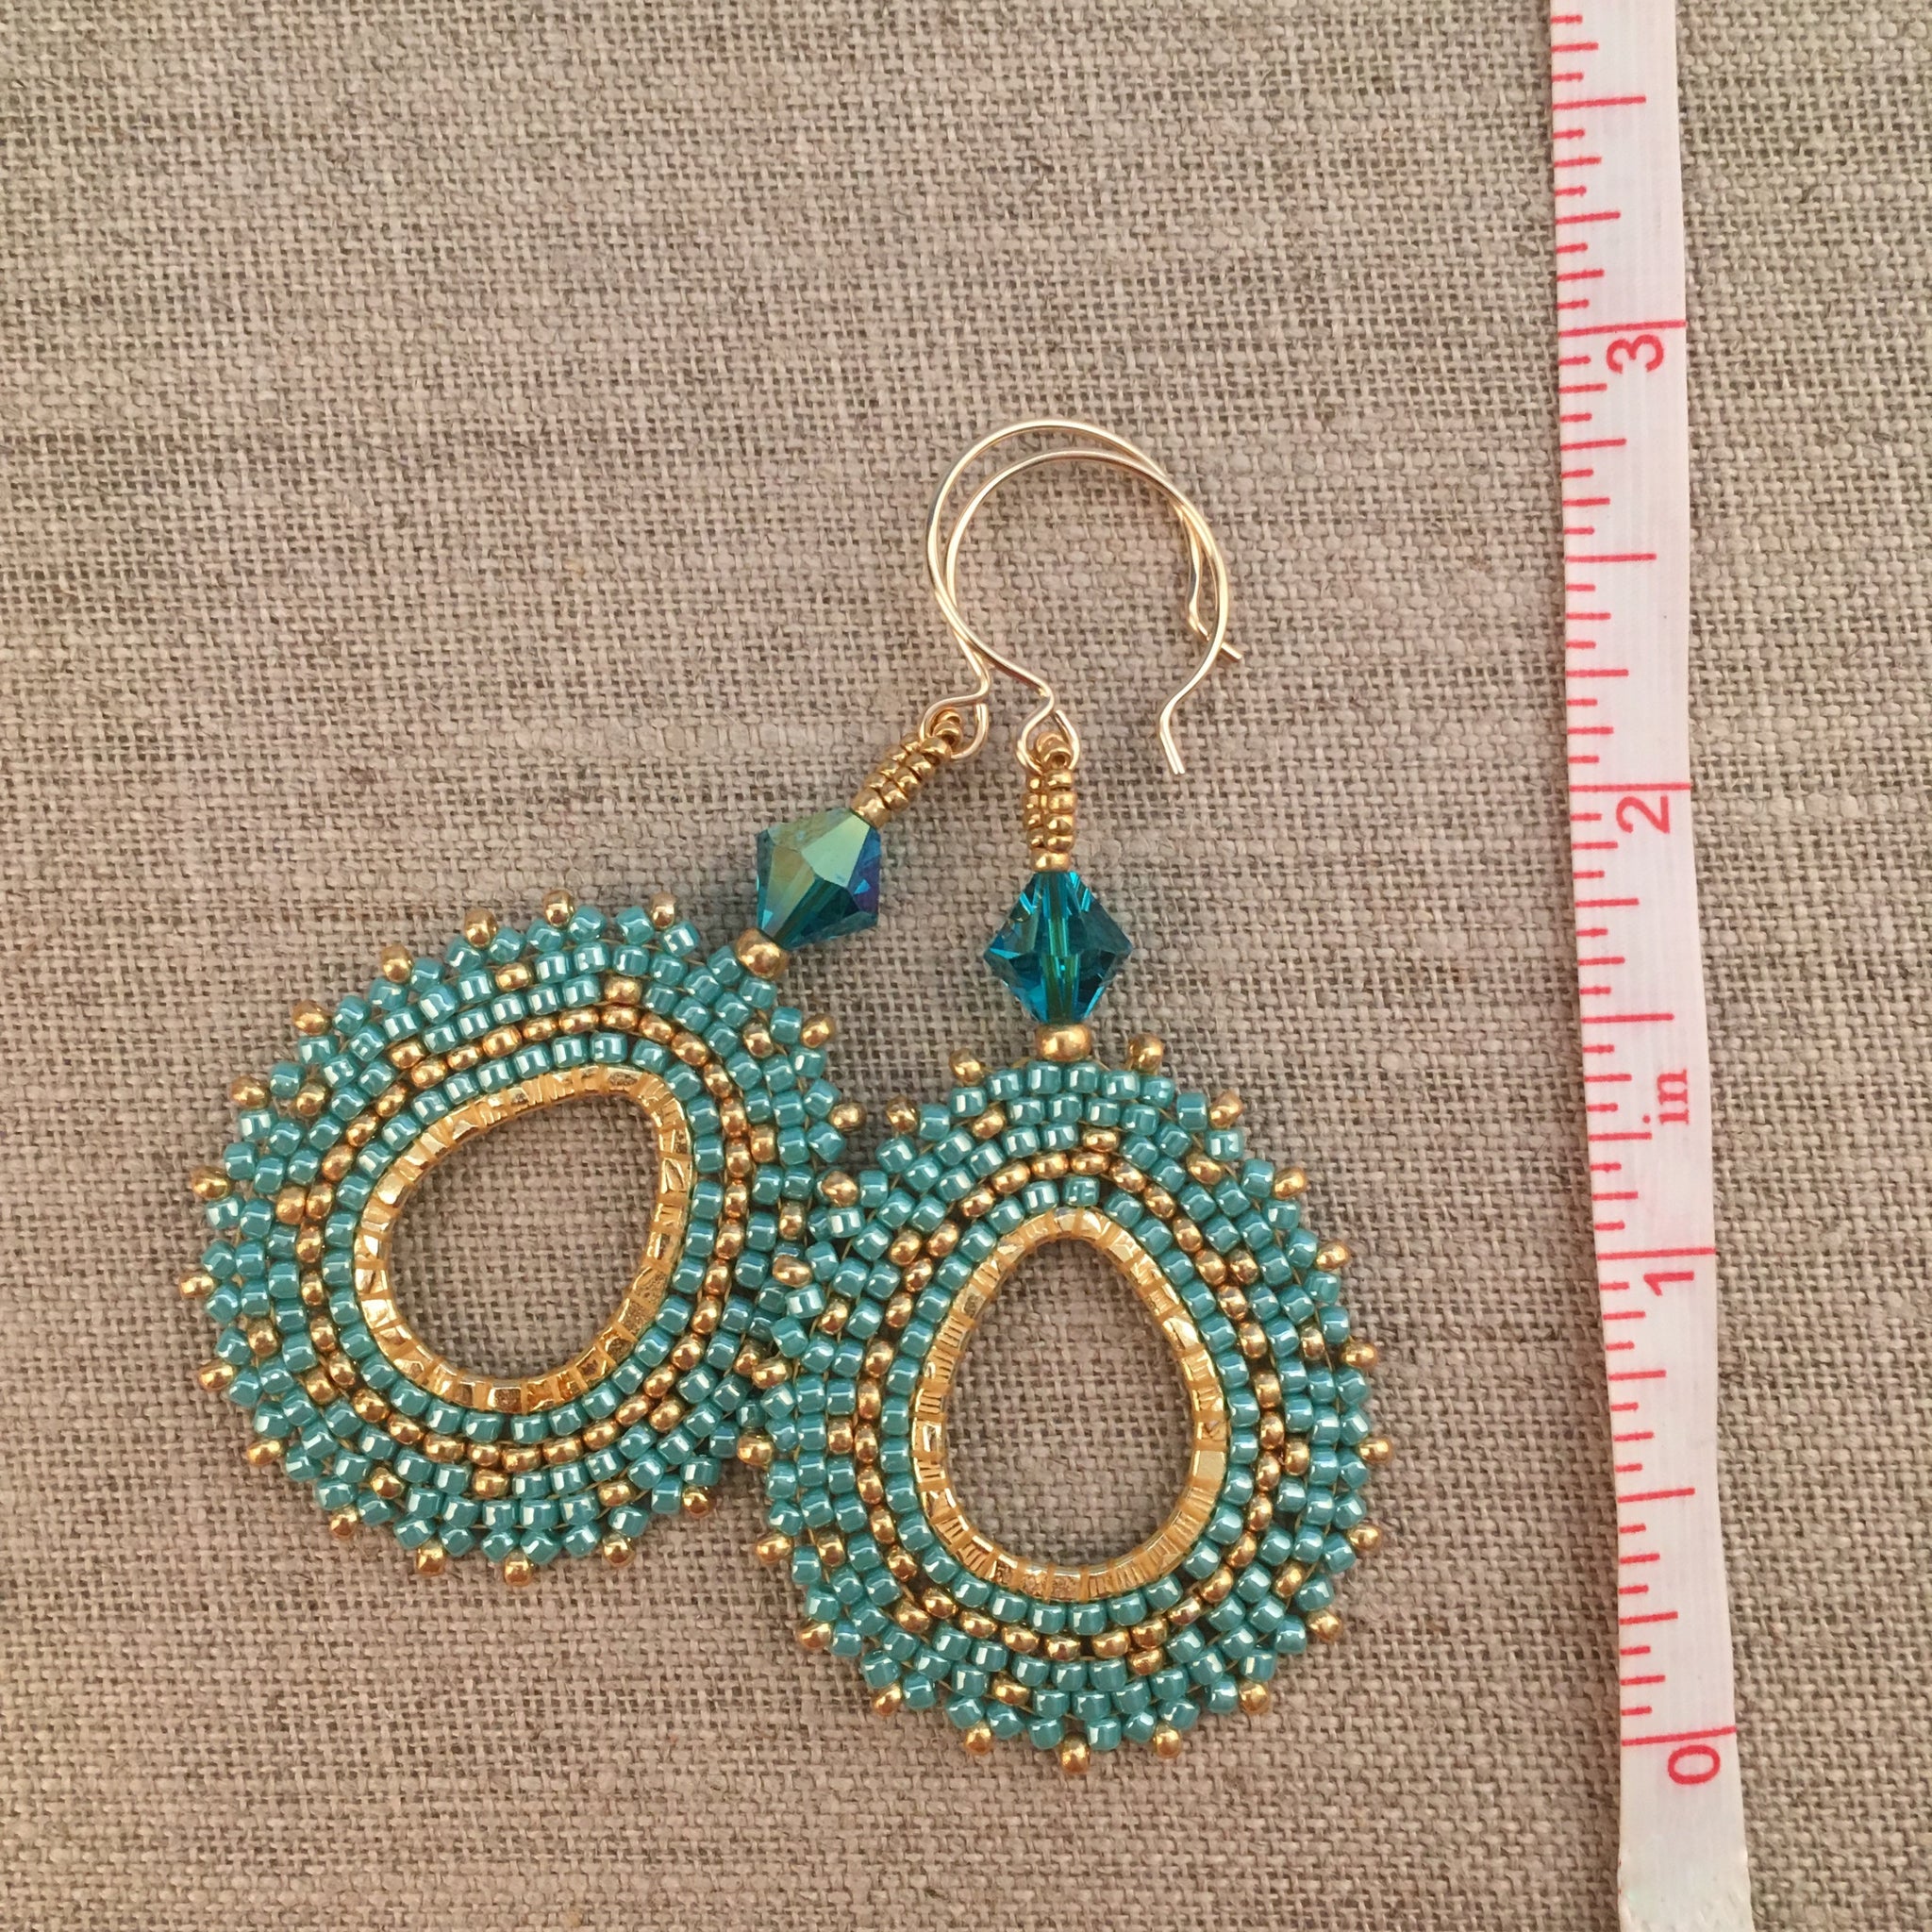 Turquoise Green and Gold Oval Hoop Earrings with Swarovski™ Crystals